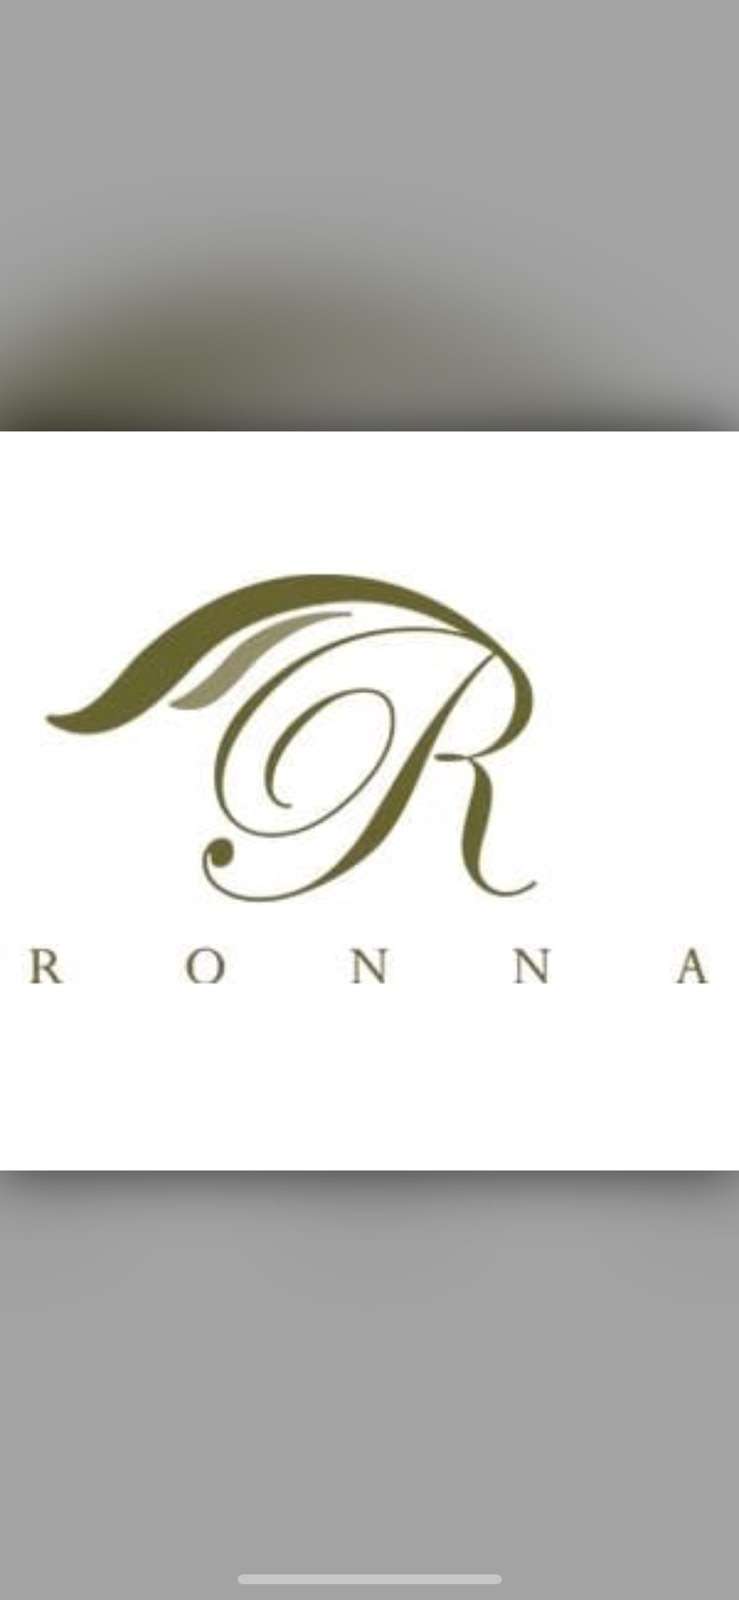 RonnaSkin - Westminster | 2861 W 120th Ave, Westminster, CO 80234 | Phone: (303) 638-9322